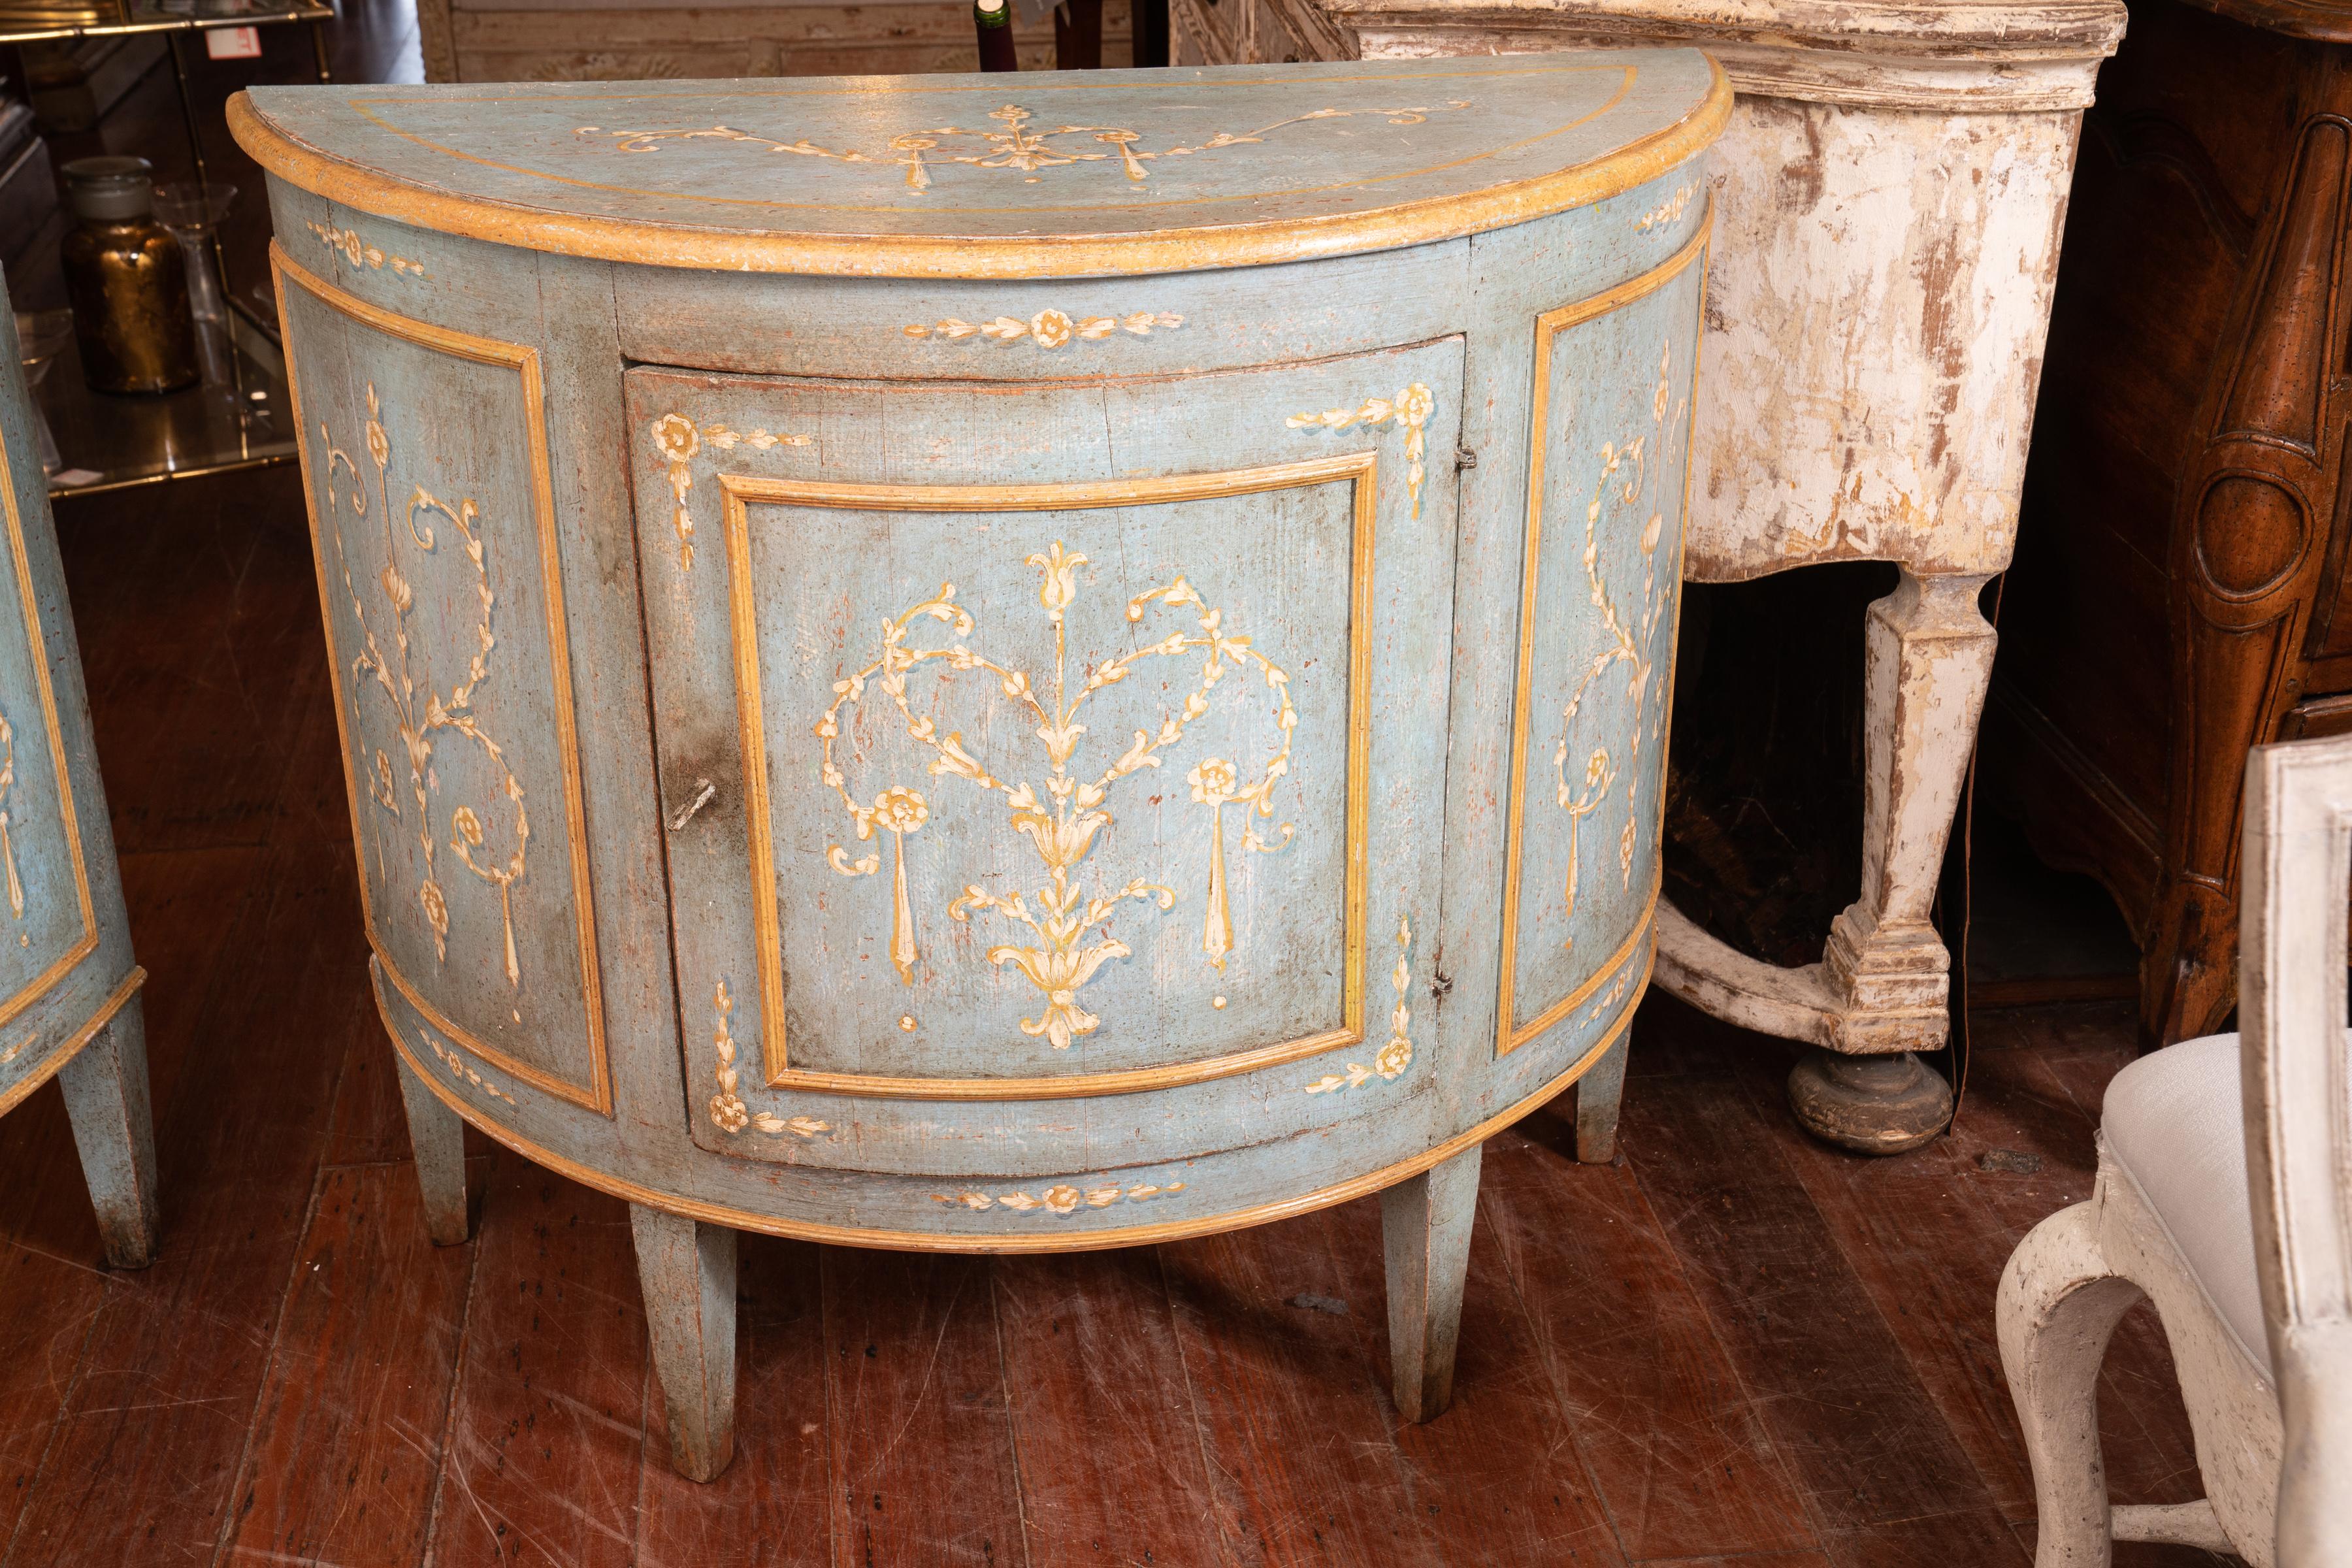 Beautifully painted pair of demilune buffets with original paint. Muted colors can fit in with any décor, circa 1890.